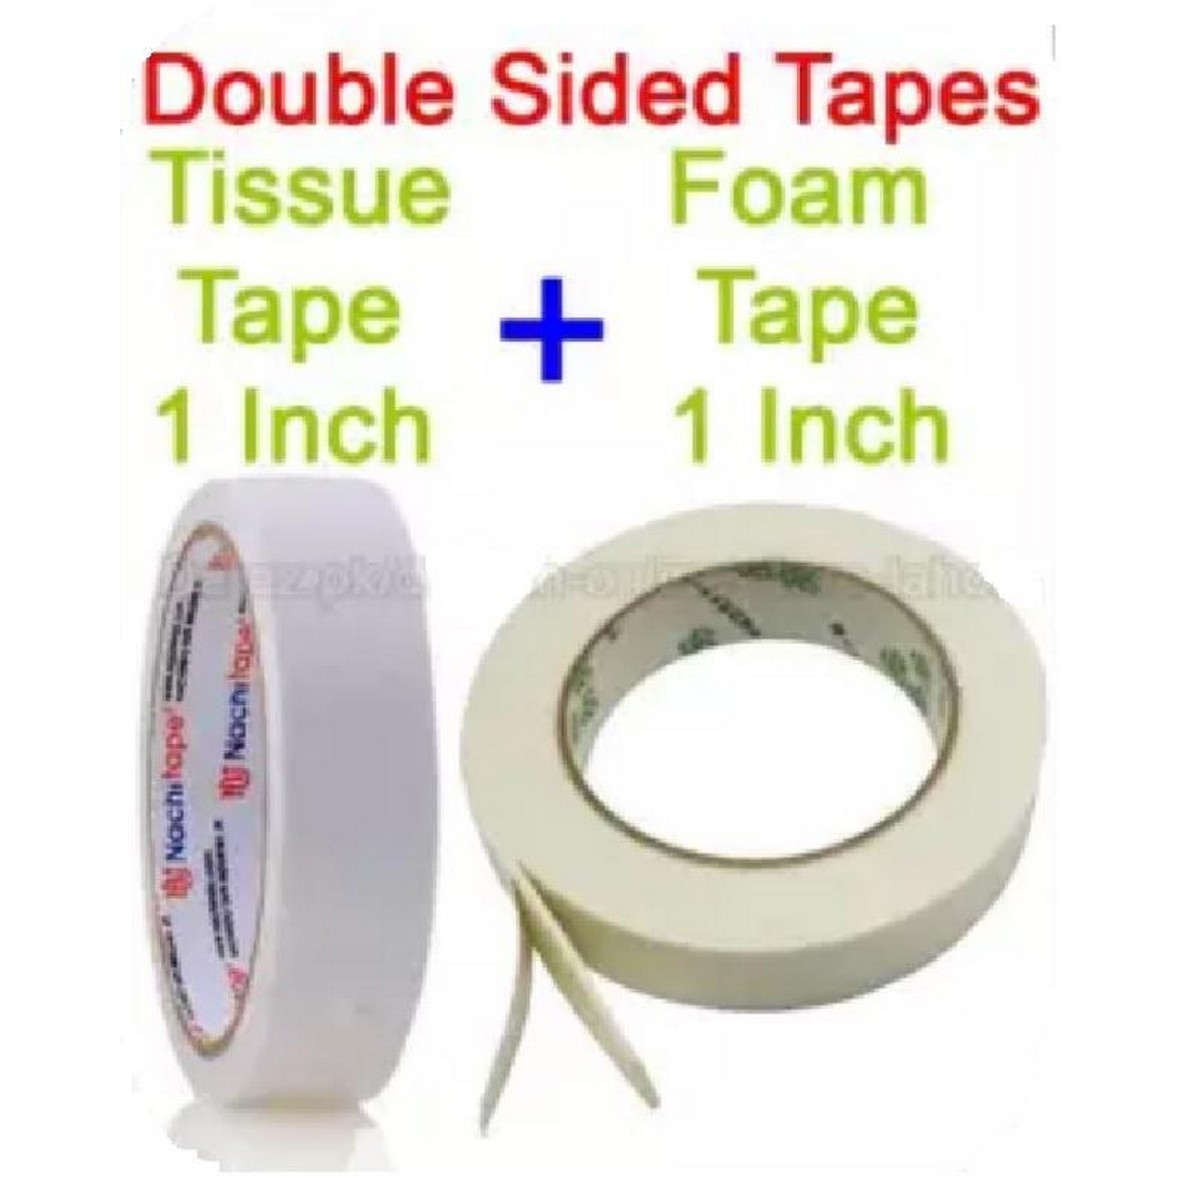 Pack Of 2 Double Sided Tissue And Double Sided Foam Tape Buy Online At Best Prices In Pakistan Daraz Pk